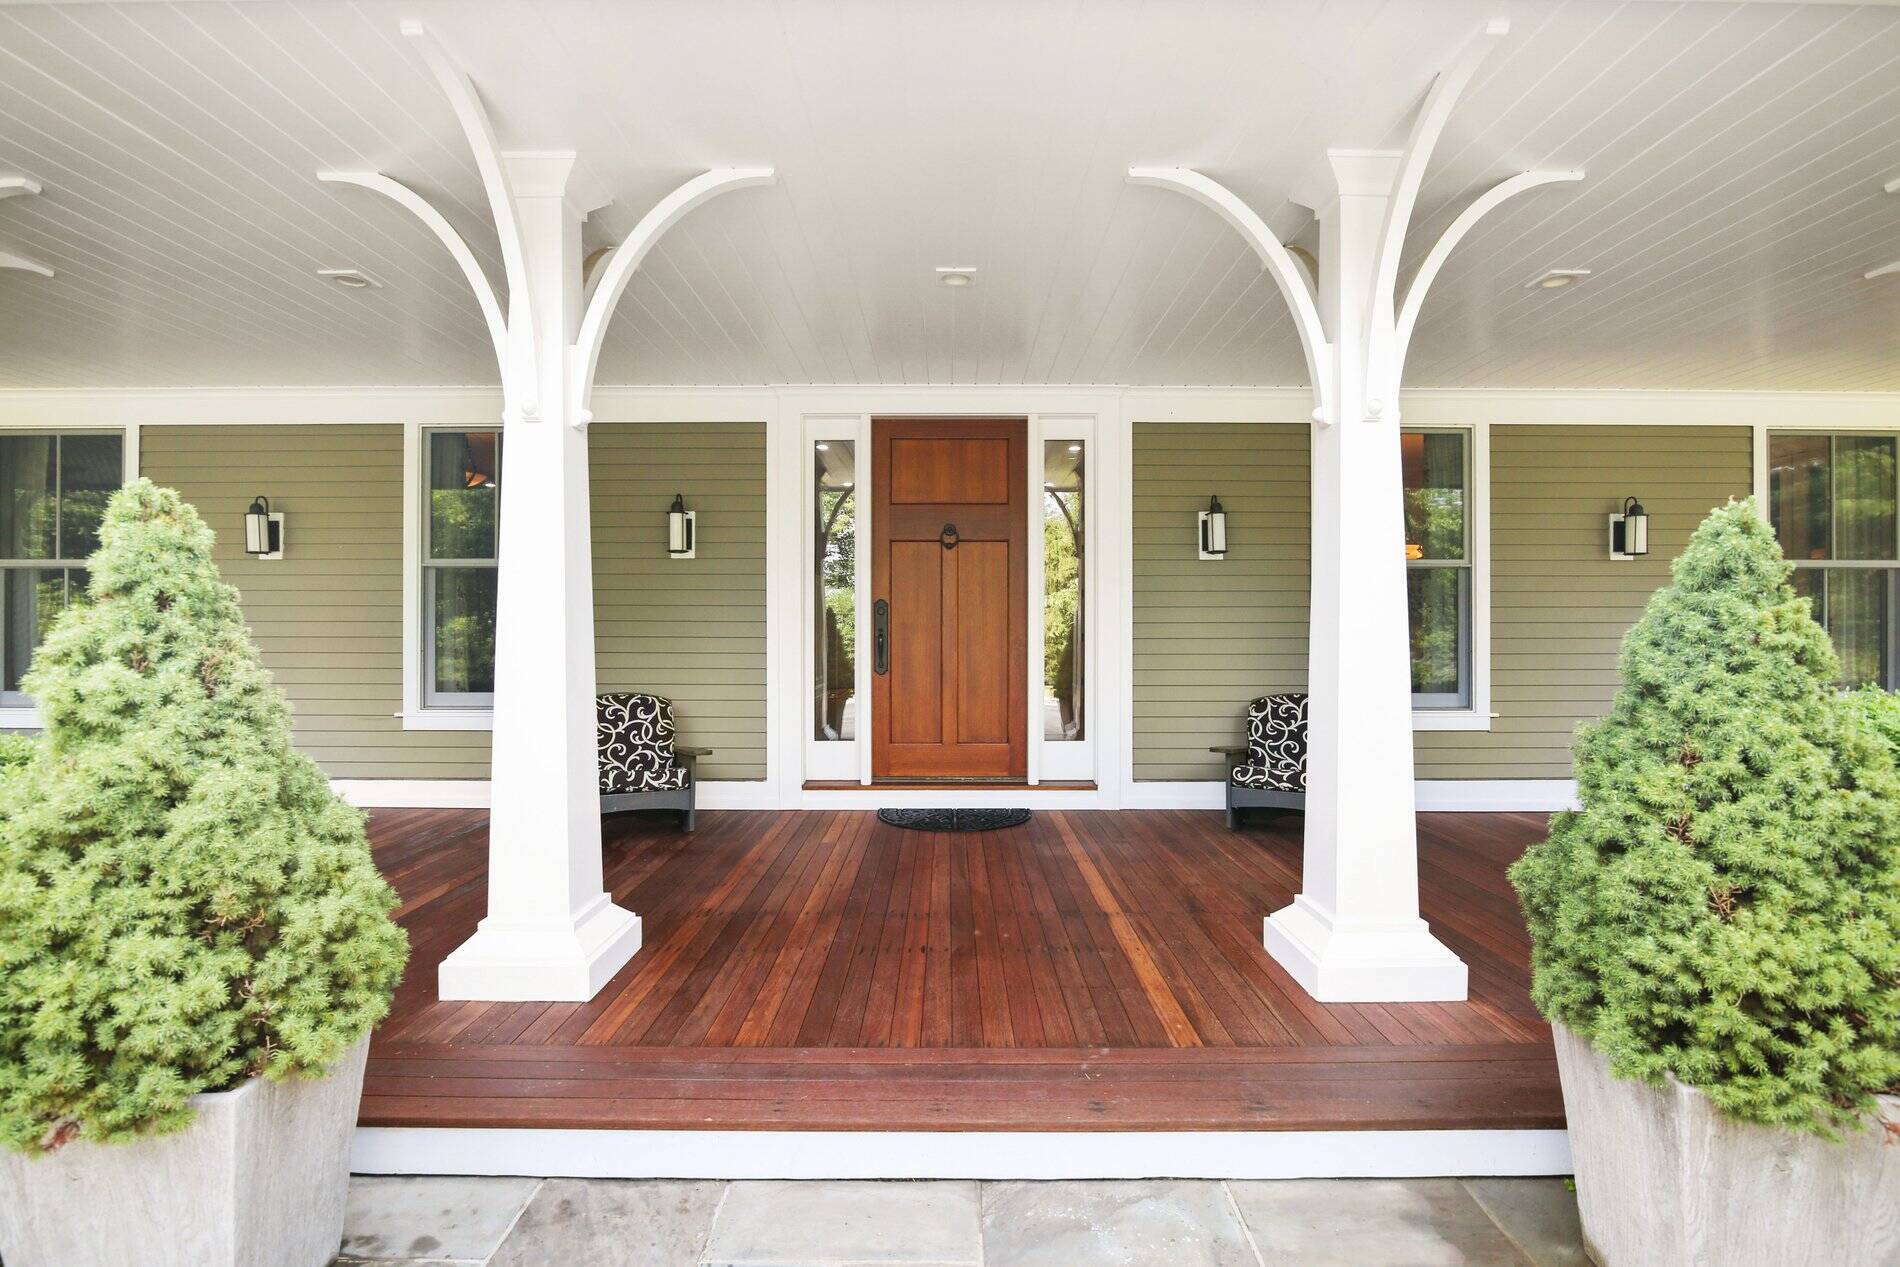 What Is The Best Paint For Porch Floors?